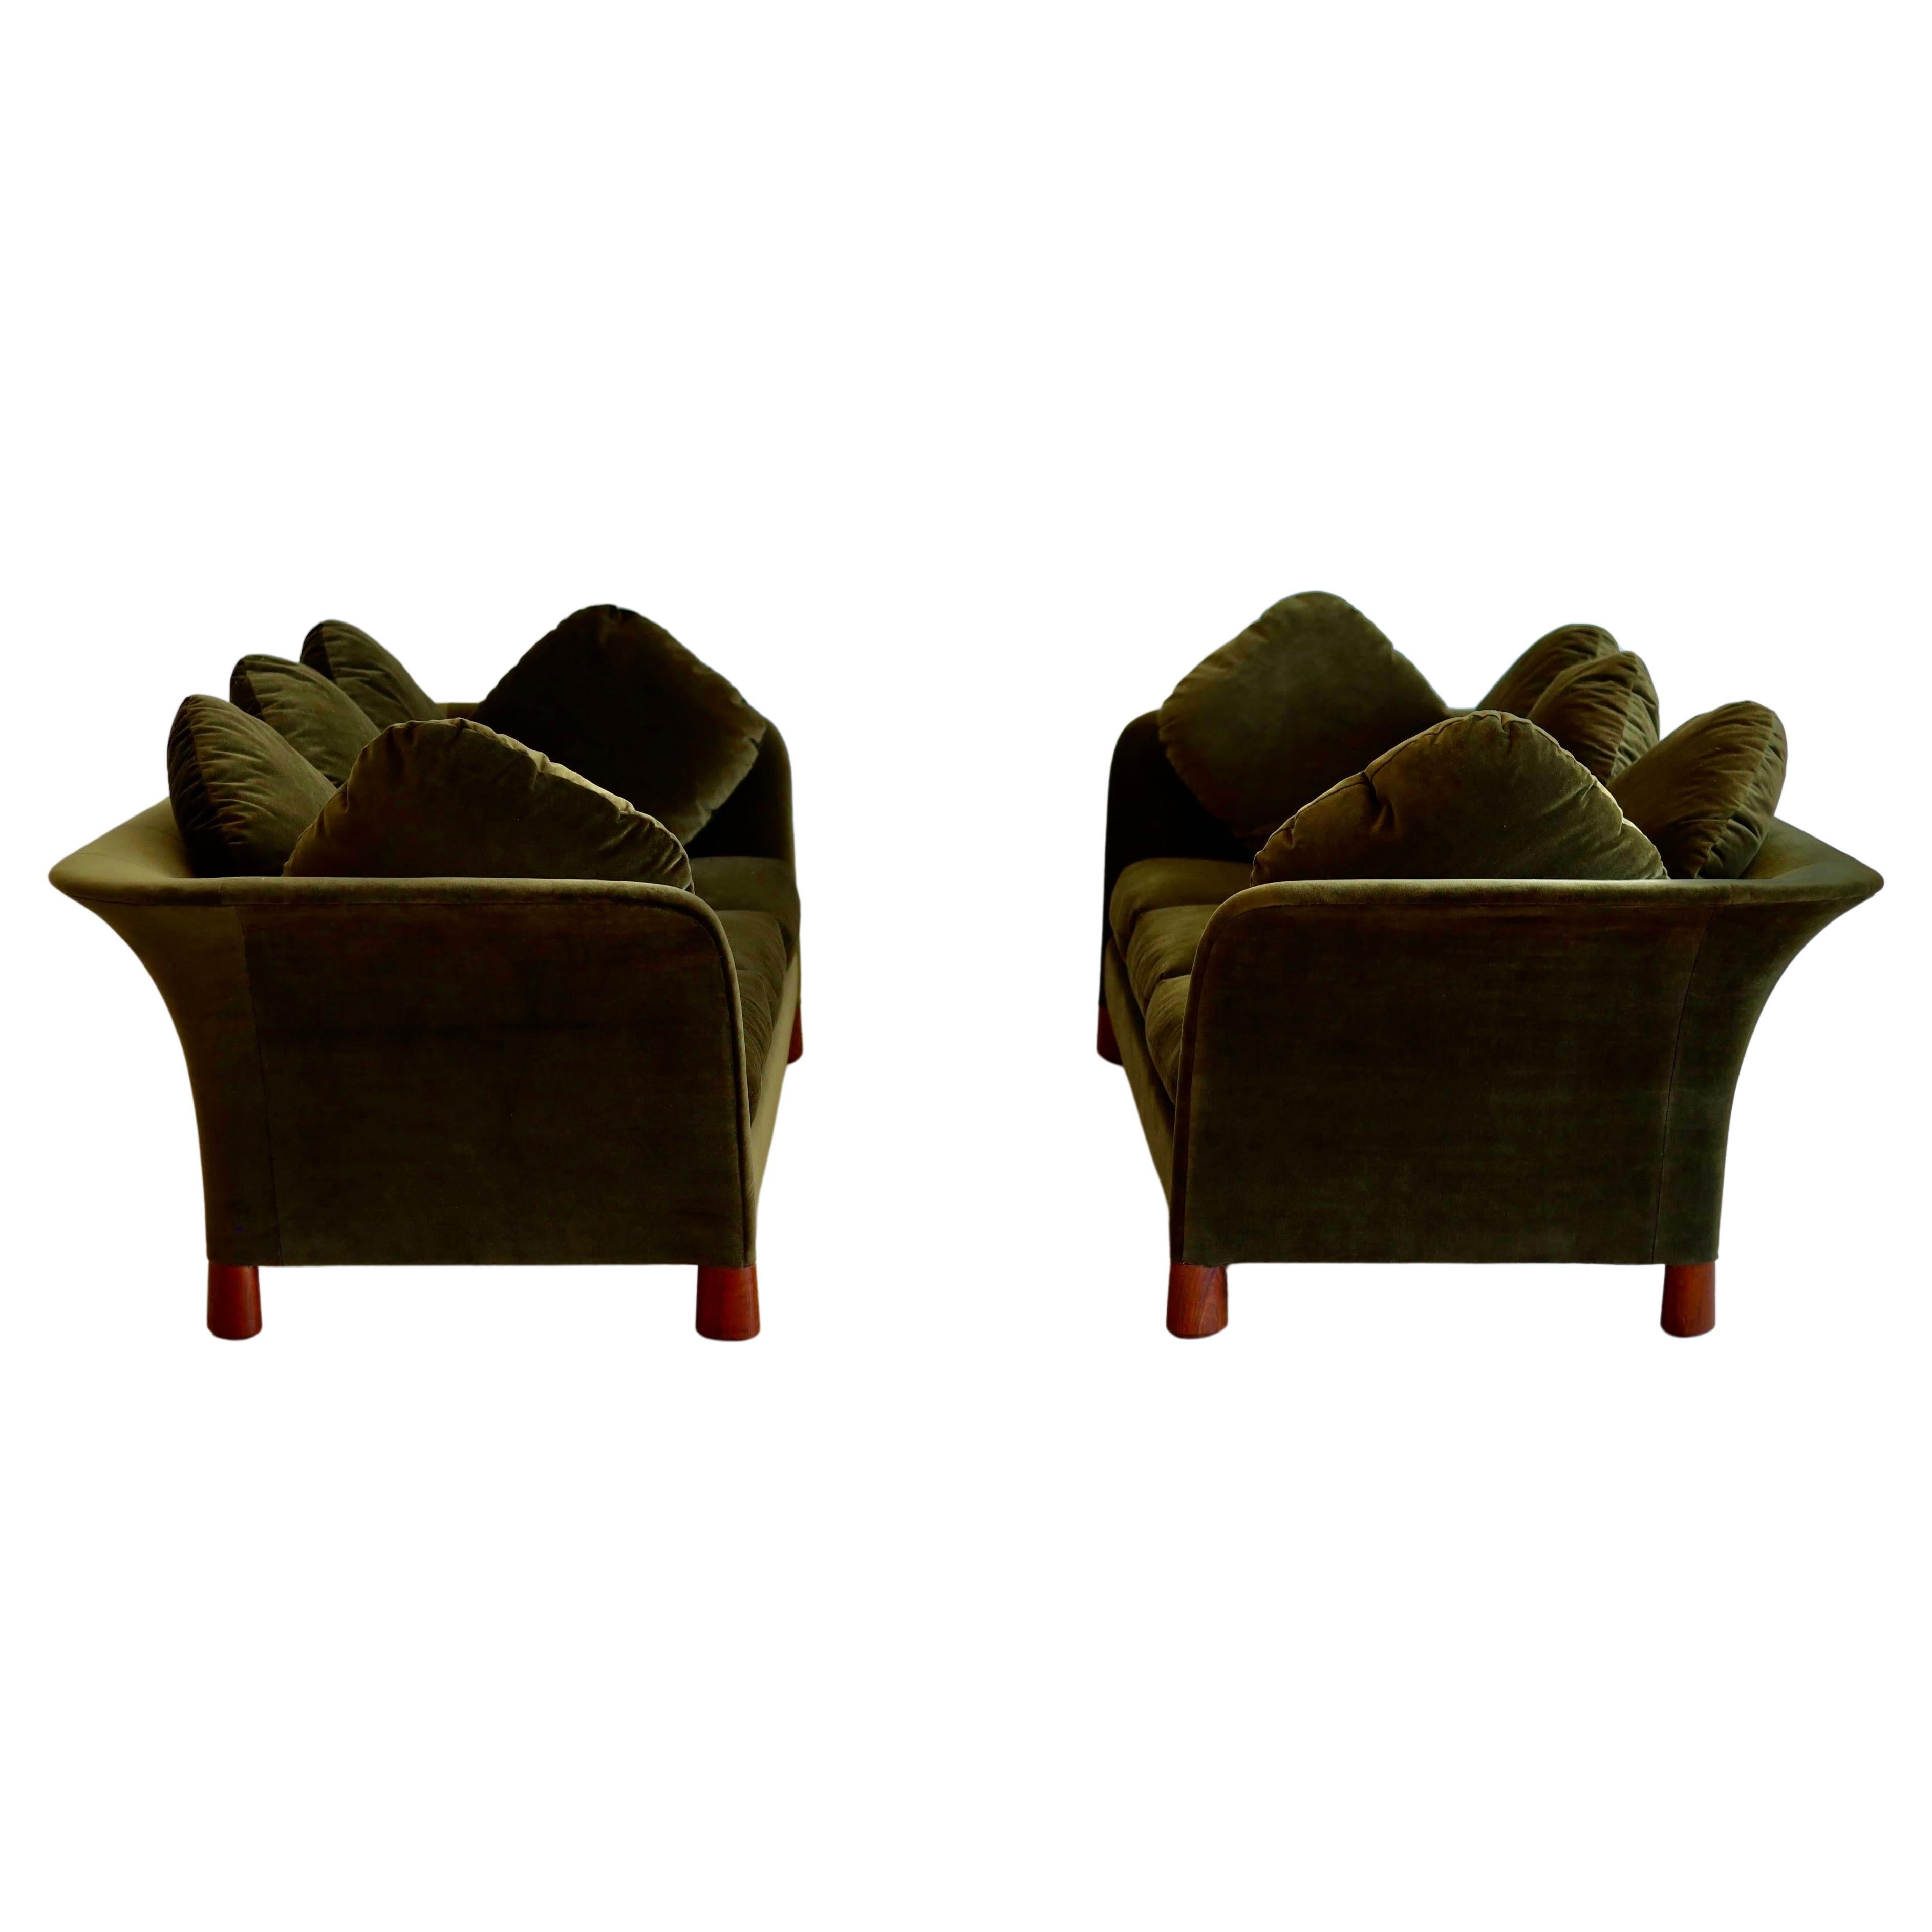 Please feel free to reach out for efficient shipping to your zip code.

Pair Tuxedo Sofas by Cedric Hartman.
Circa 1969.
Model #15C.
Fully restored in olive cotton velvet.
Solid sculpted tusk form feet.